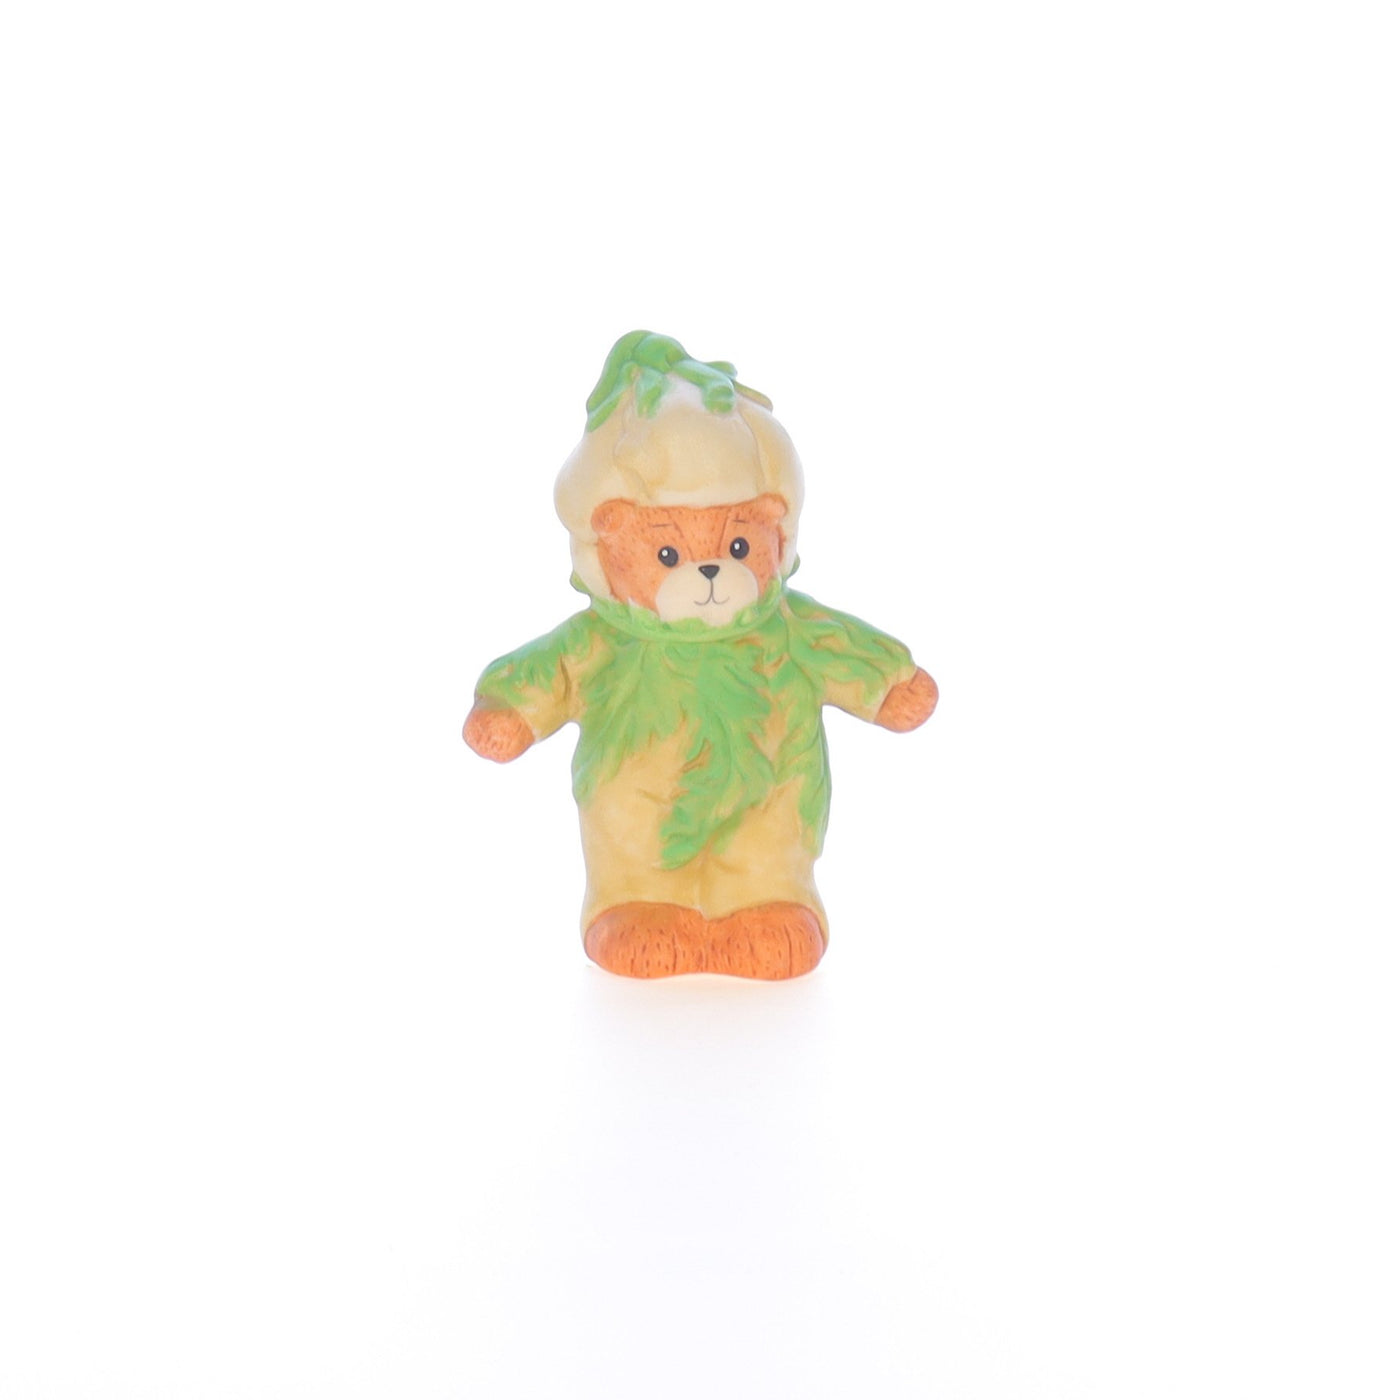 Lucy_And_Me_by_Lucy_Atwell_Porcelain_Figurine_Bear_with_Green_Flower_Costume_Lucy_Unknown_013_01